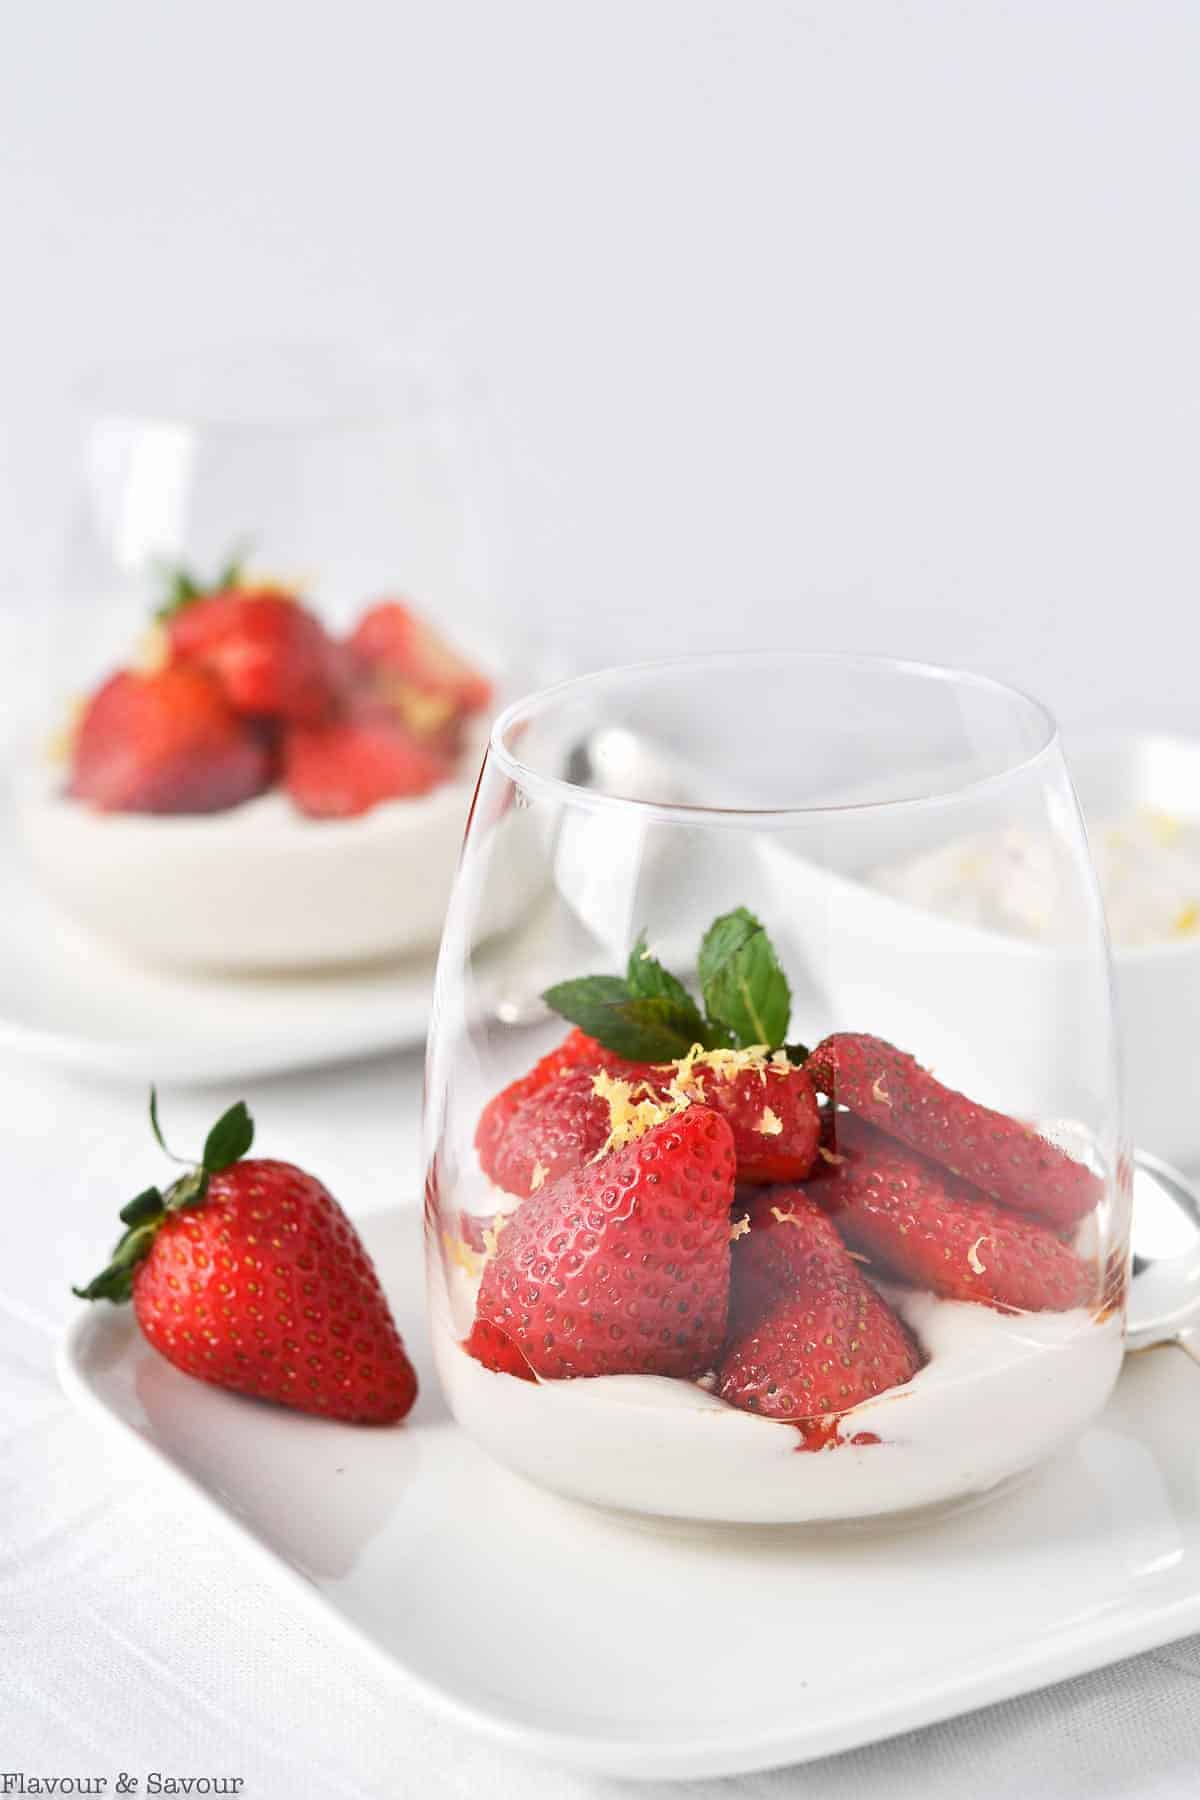 Macerated Balsamic Strawberries with cashew cream in a clear dessert glasses